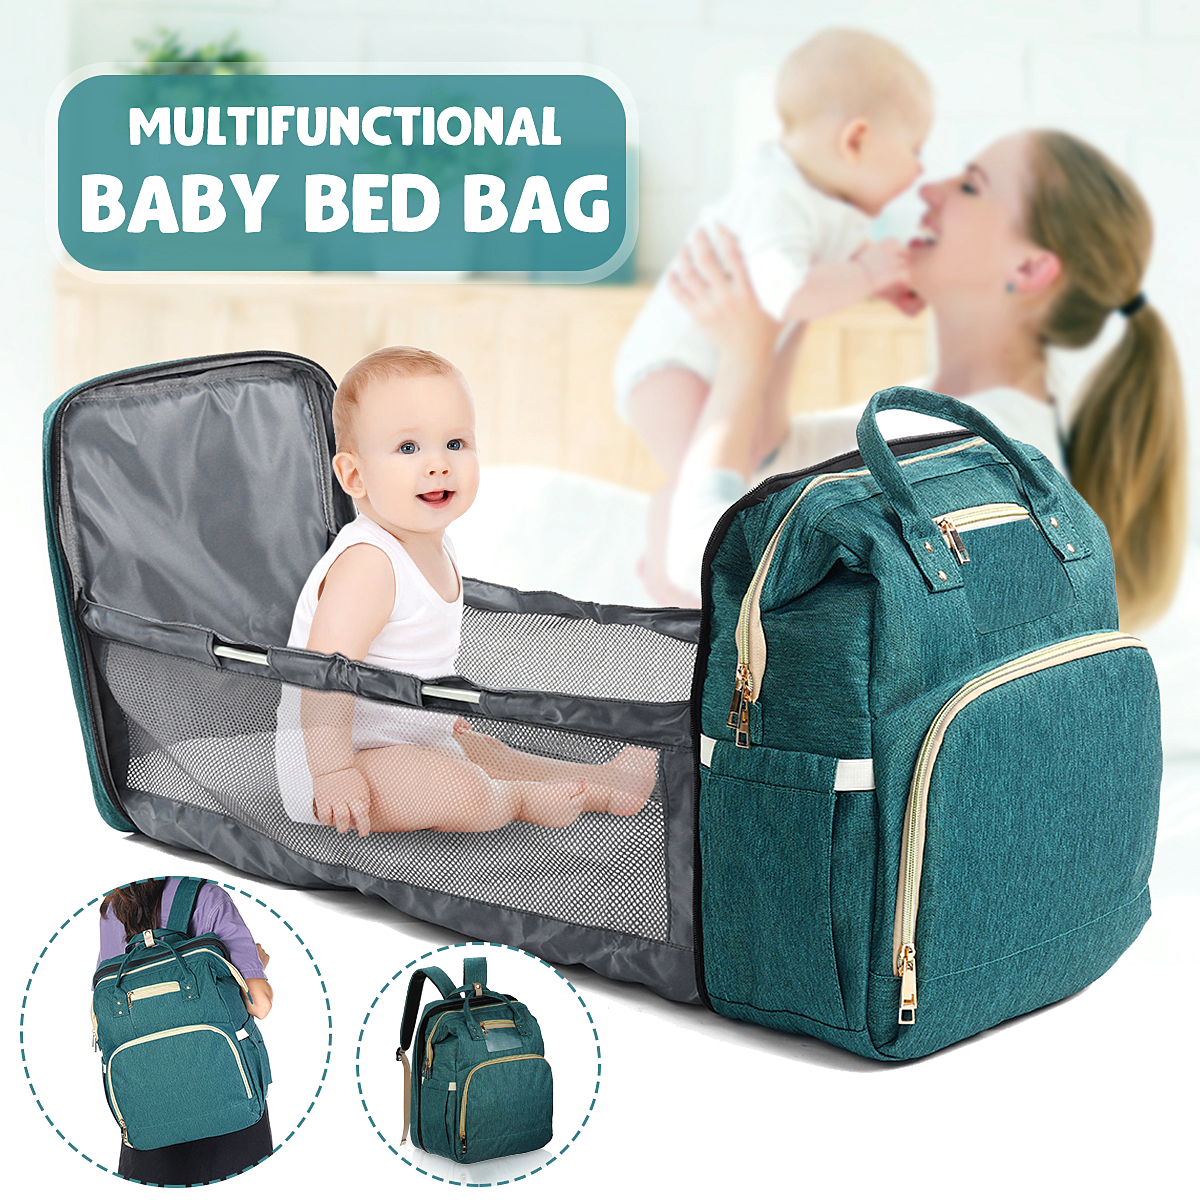 Multifunctional-Folding-Diaper-Bag-Waterproof-Baby-Sleep-Infant-Bed-Changing-Station-Outdoor-Travel--1810331-1